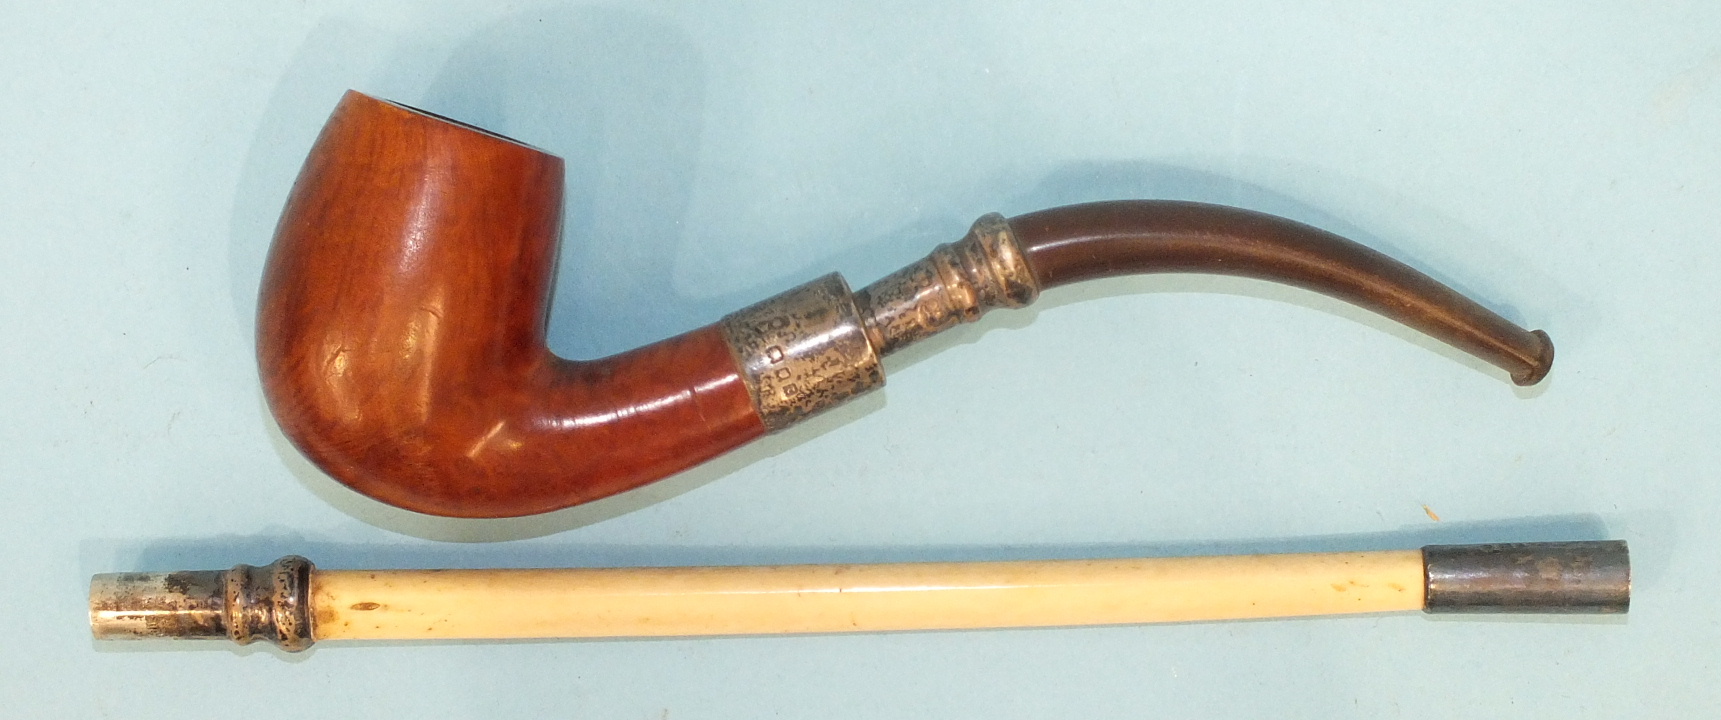 A silver-mounted briar root pipe with detachable mouthpiece and extension.